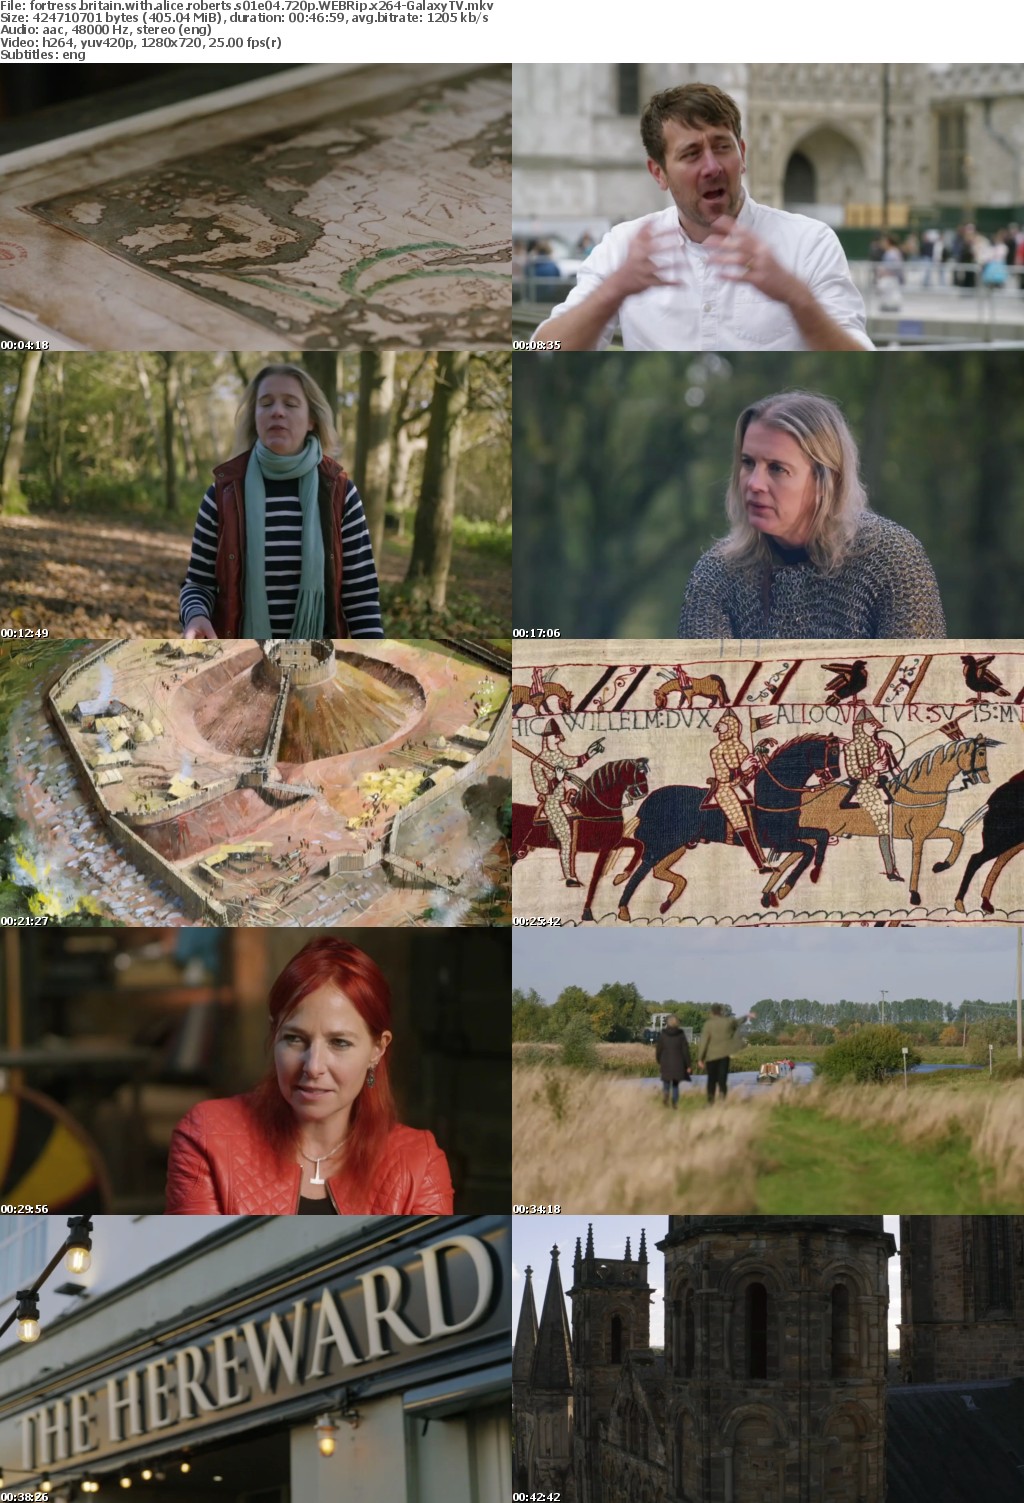 Fortress Britain With Alice Roberts S01 COMPLETE 720p WEBRip x264-GalaxyTV